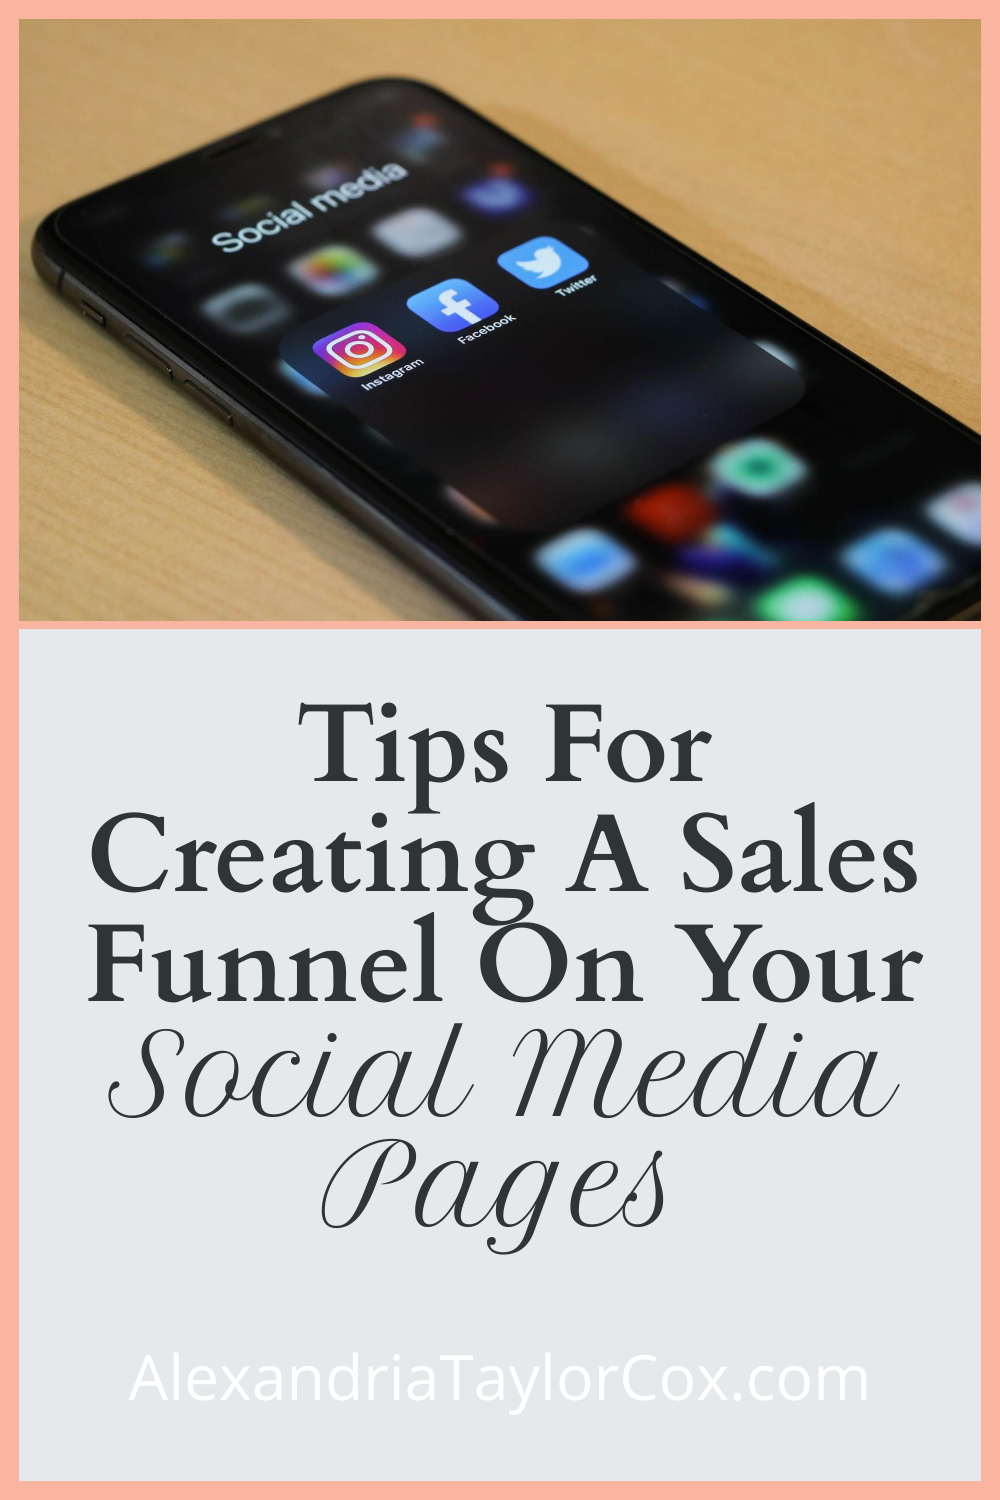 Tips for Creating a Sales Funnel On Your Social Media Pages